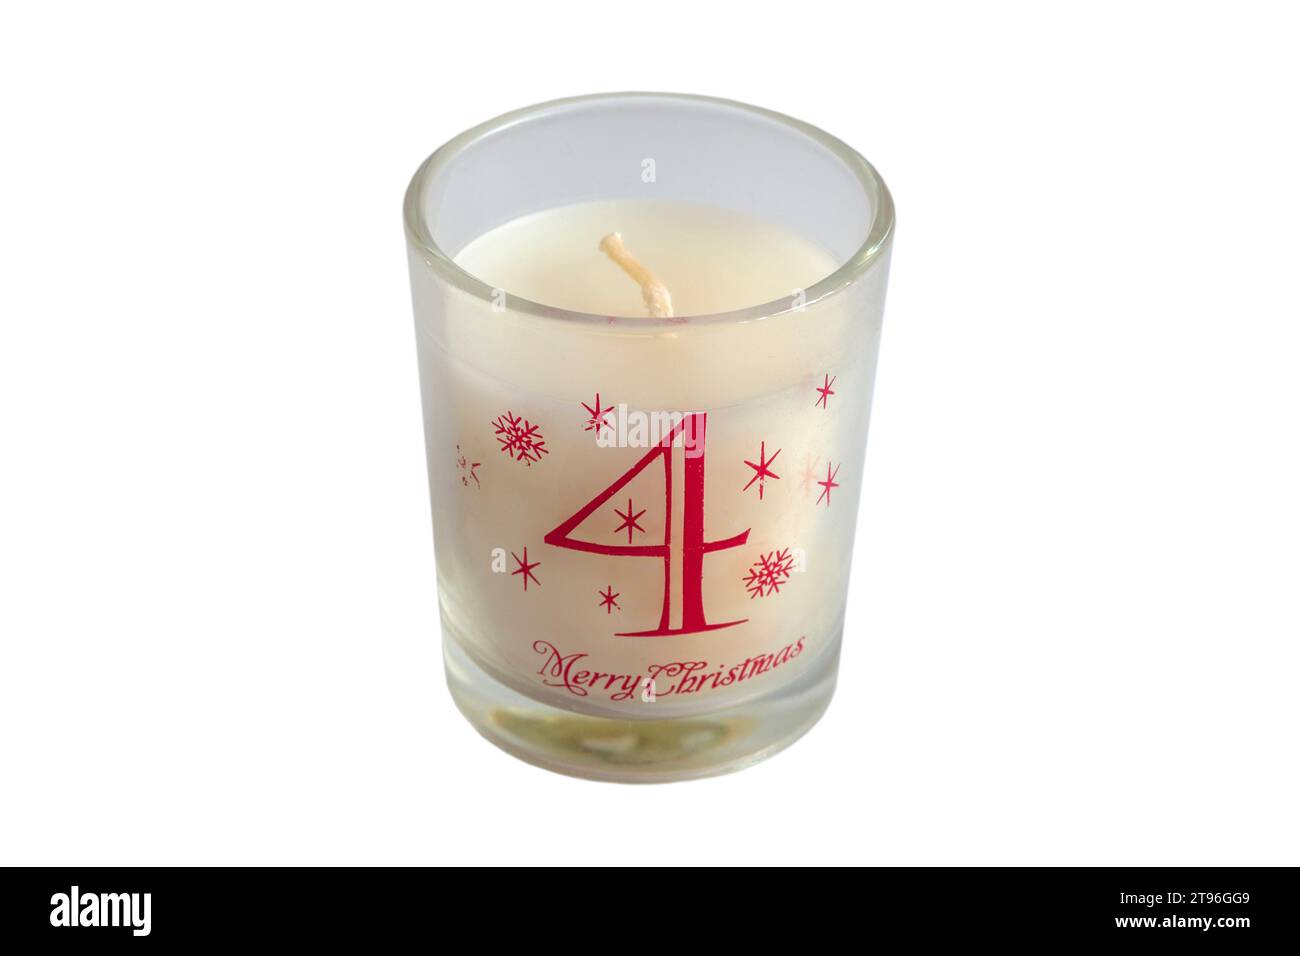 votive candle number 4 four from 12 days of Christmas votive candles set isolated on white background - Merry Christmas Stock Photo